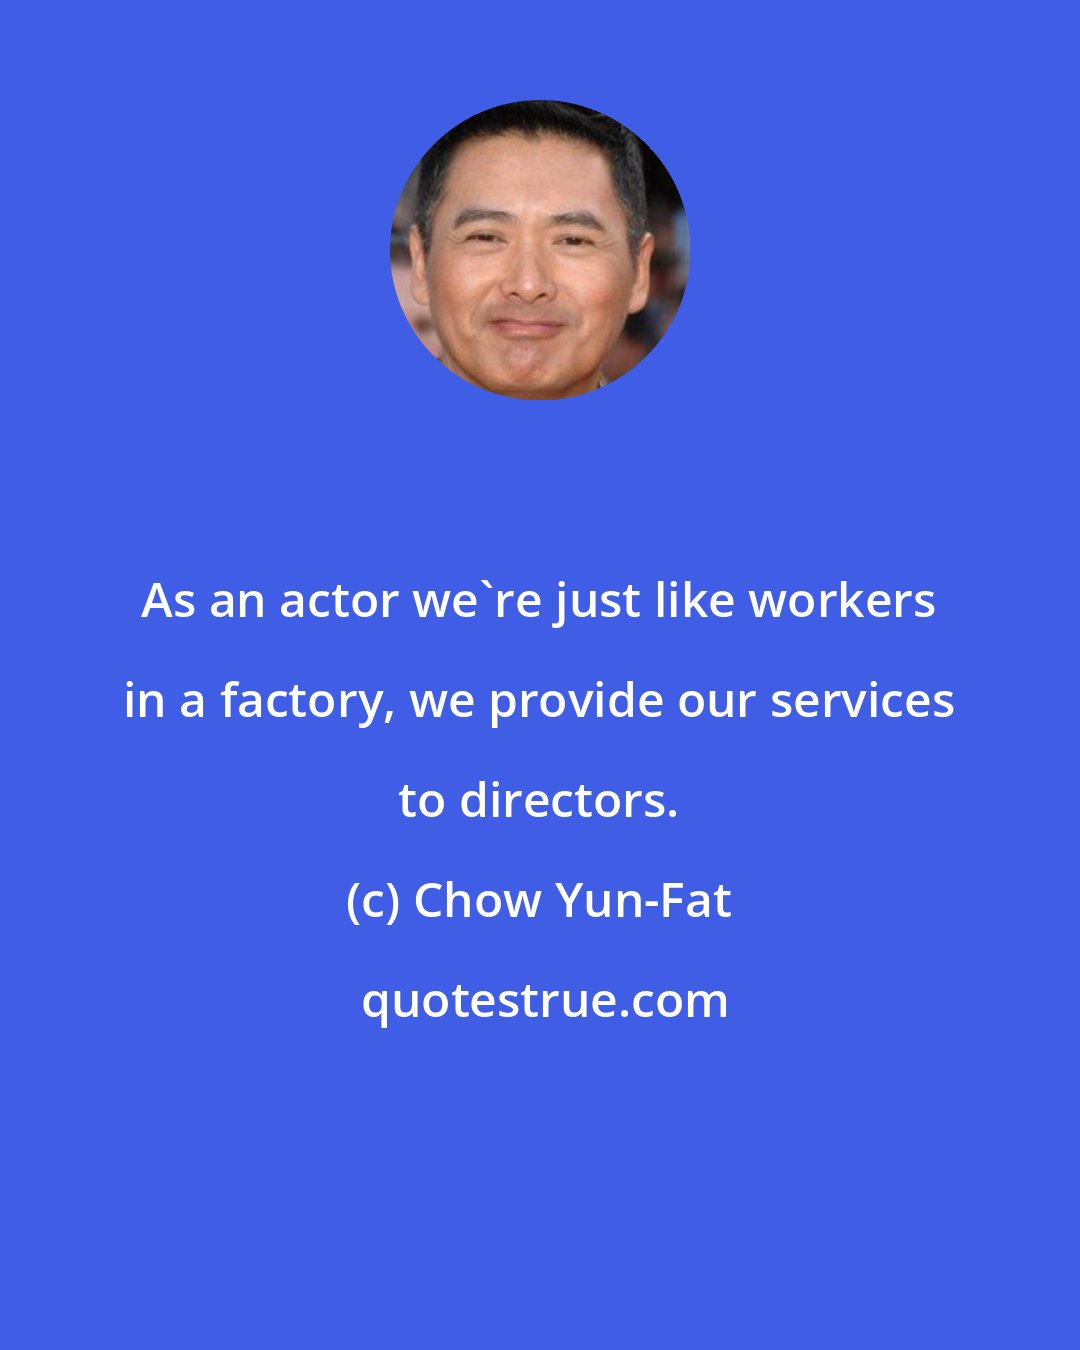 Chow Yun-Fat: As an actor we're just like workers in a factory, we provide our services to directors.